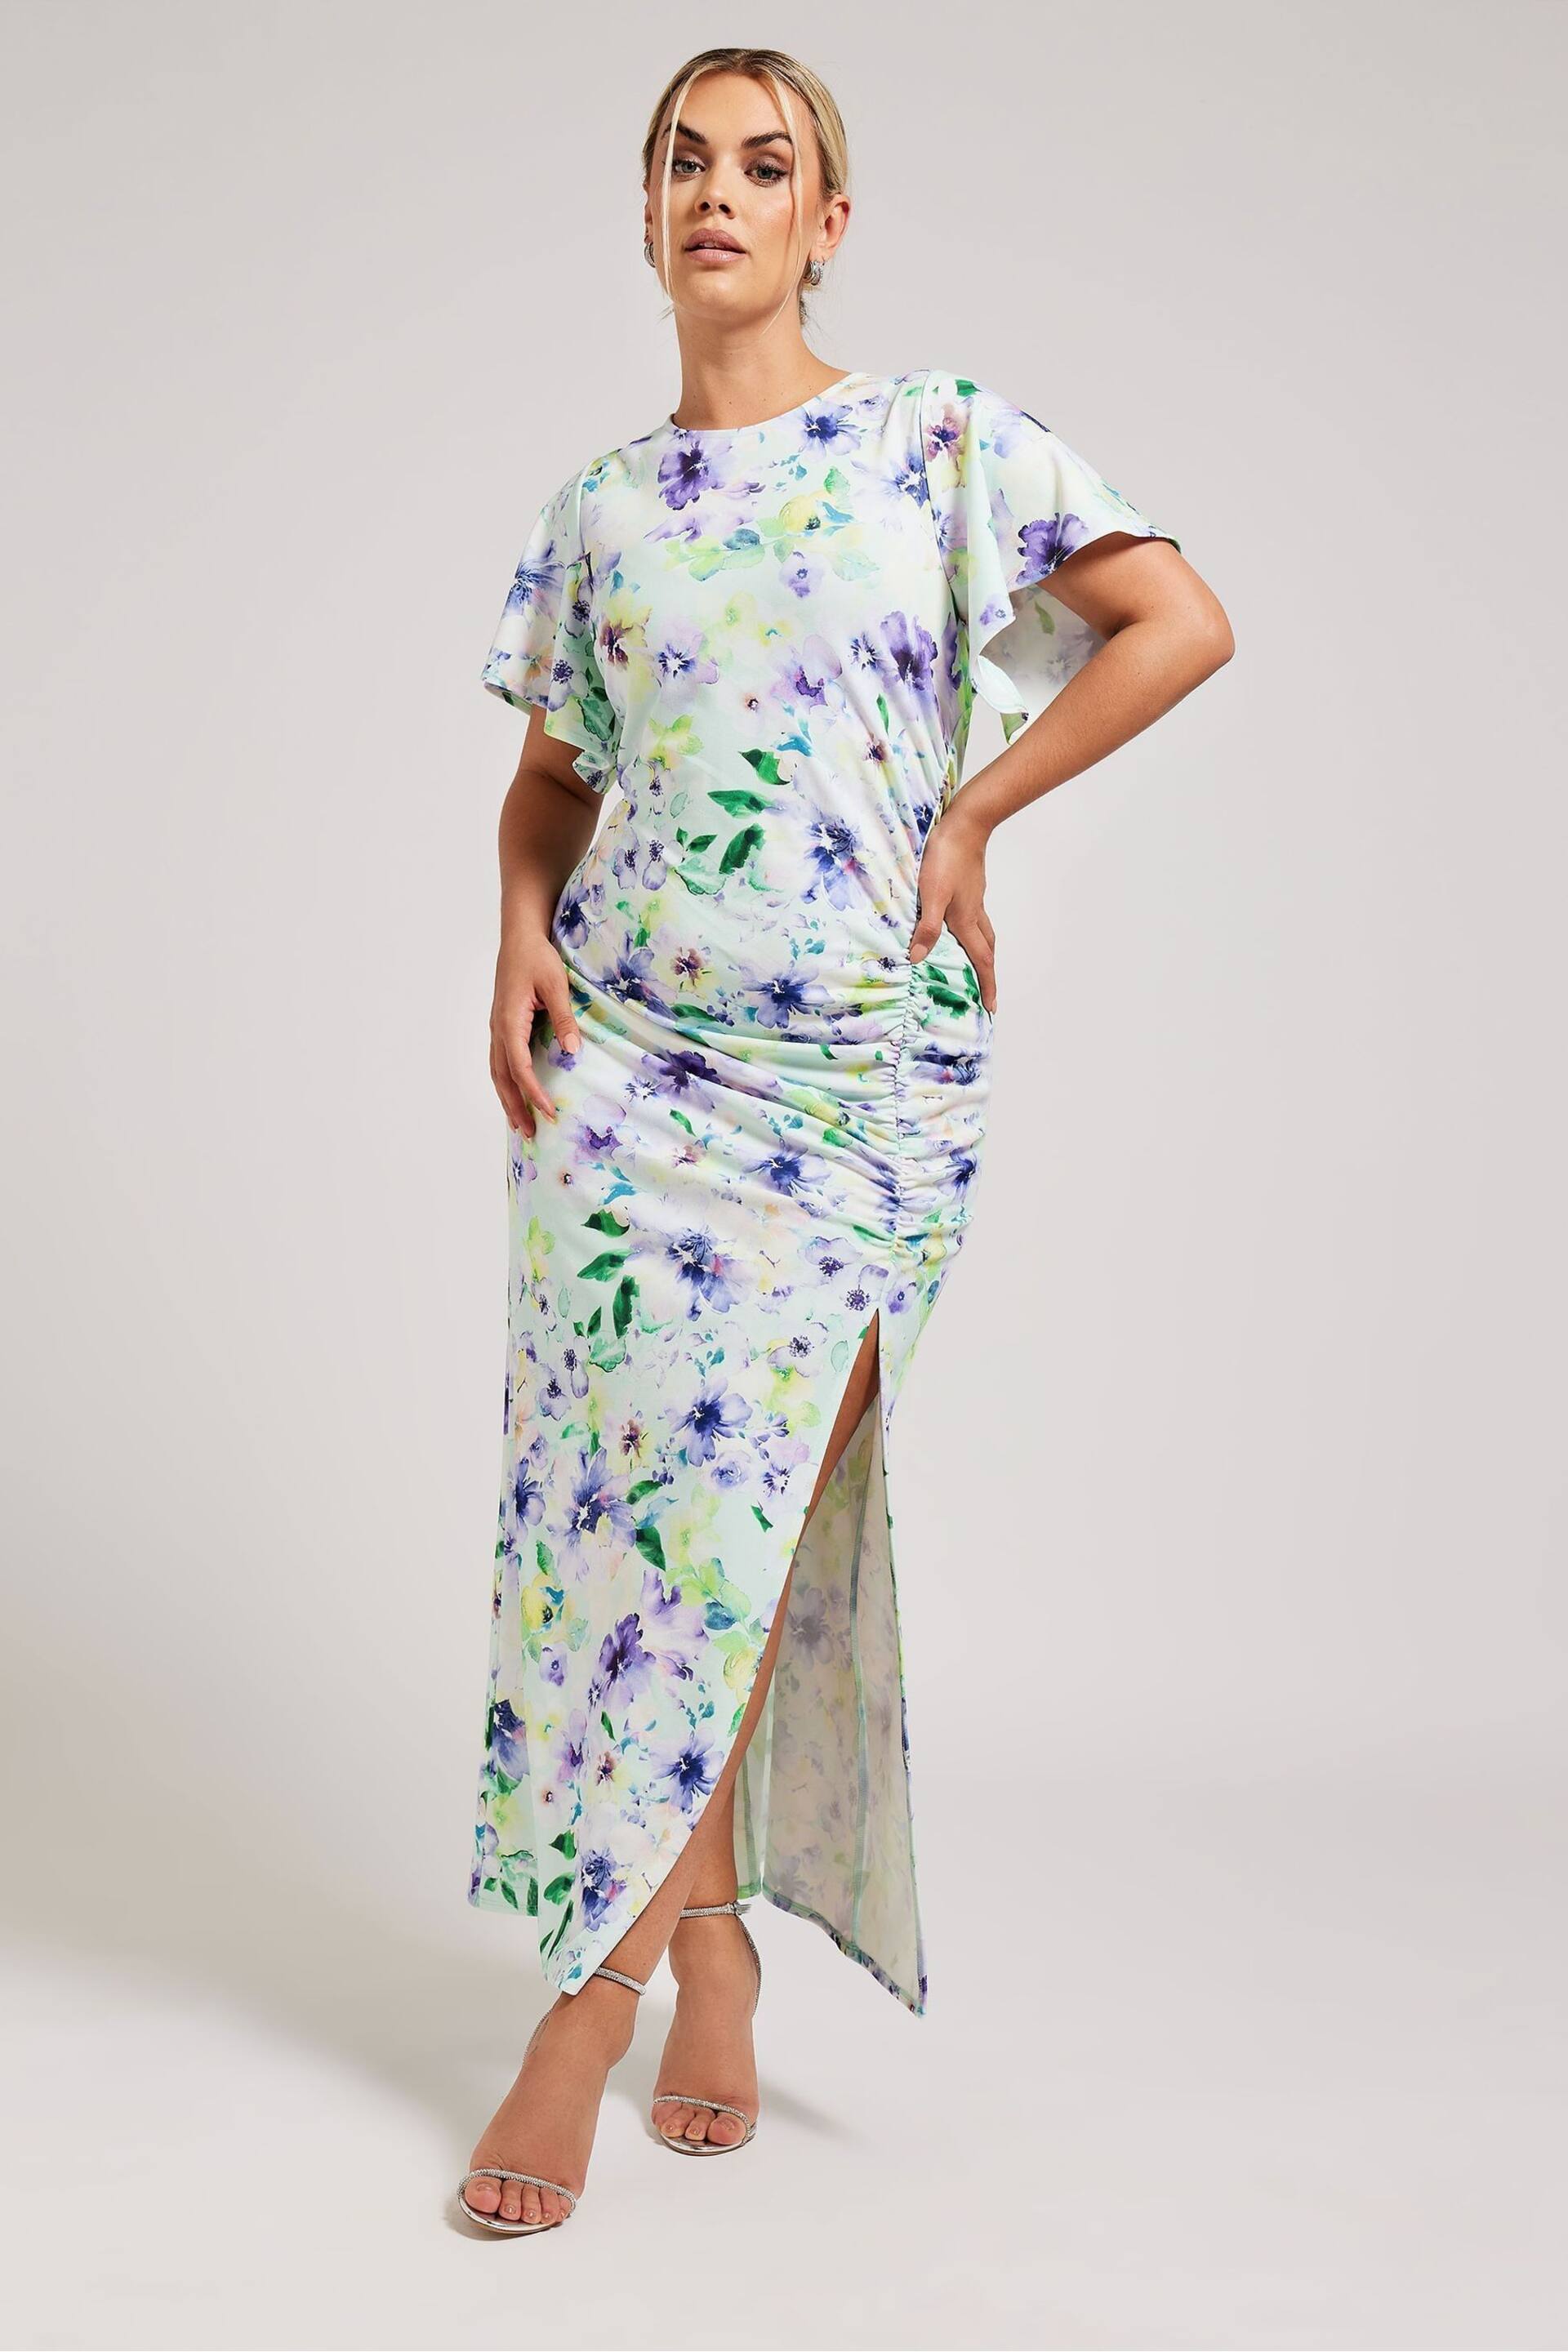 Yours Curve Green Floral Print Gathered Dress - Image 1 of 5